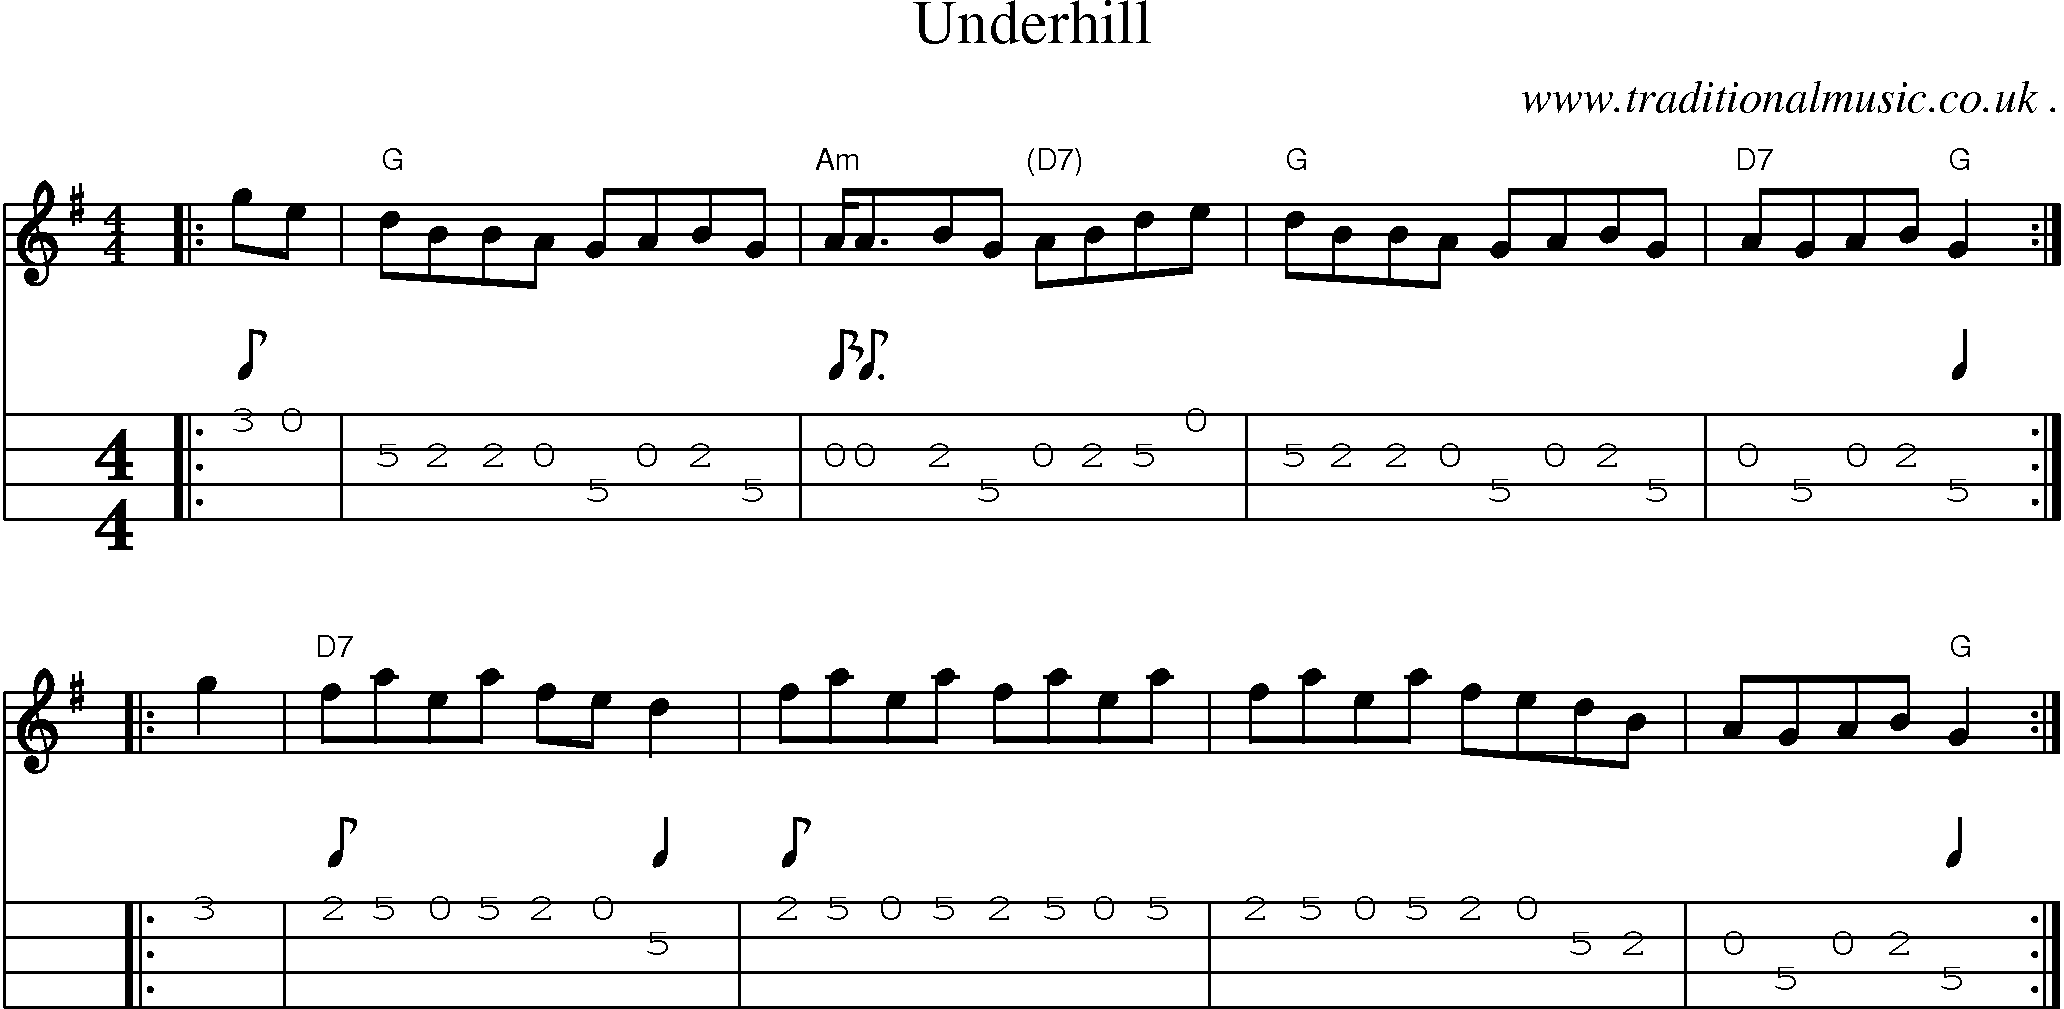 Sheet-music  score, Chords and Mandolin Tabs for Underhill